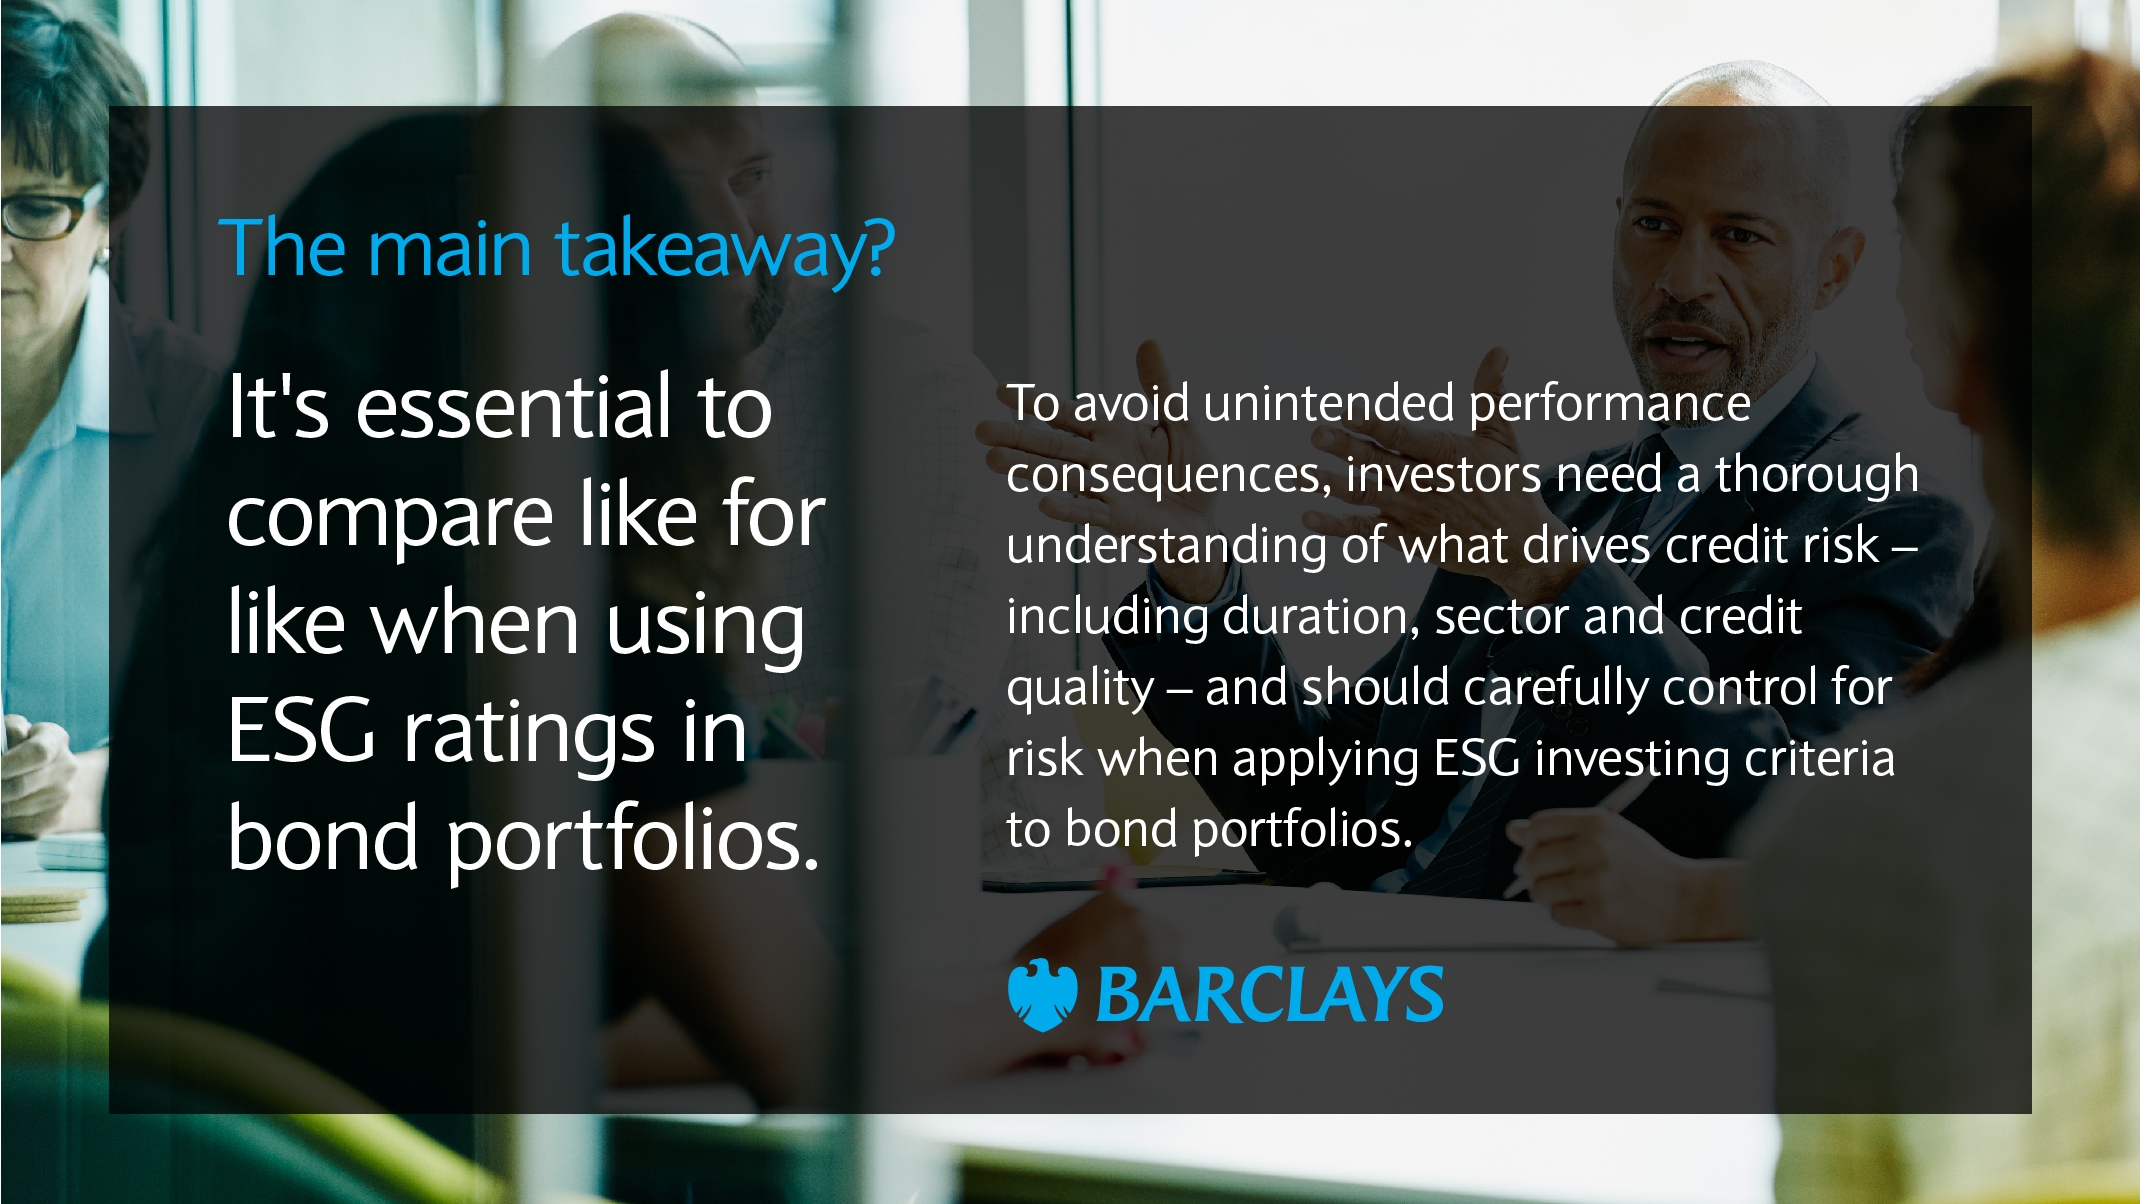 The main takeaway? It's essential to compare like for like when using ESG ratings in bond portfolios.